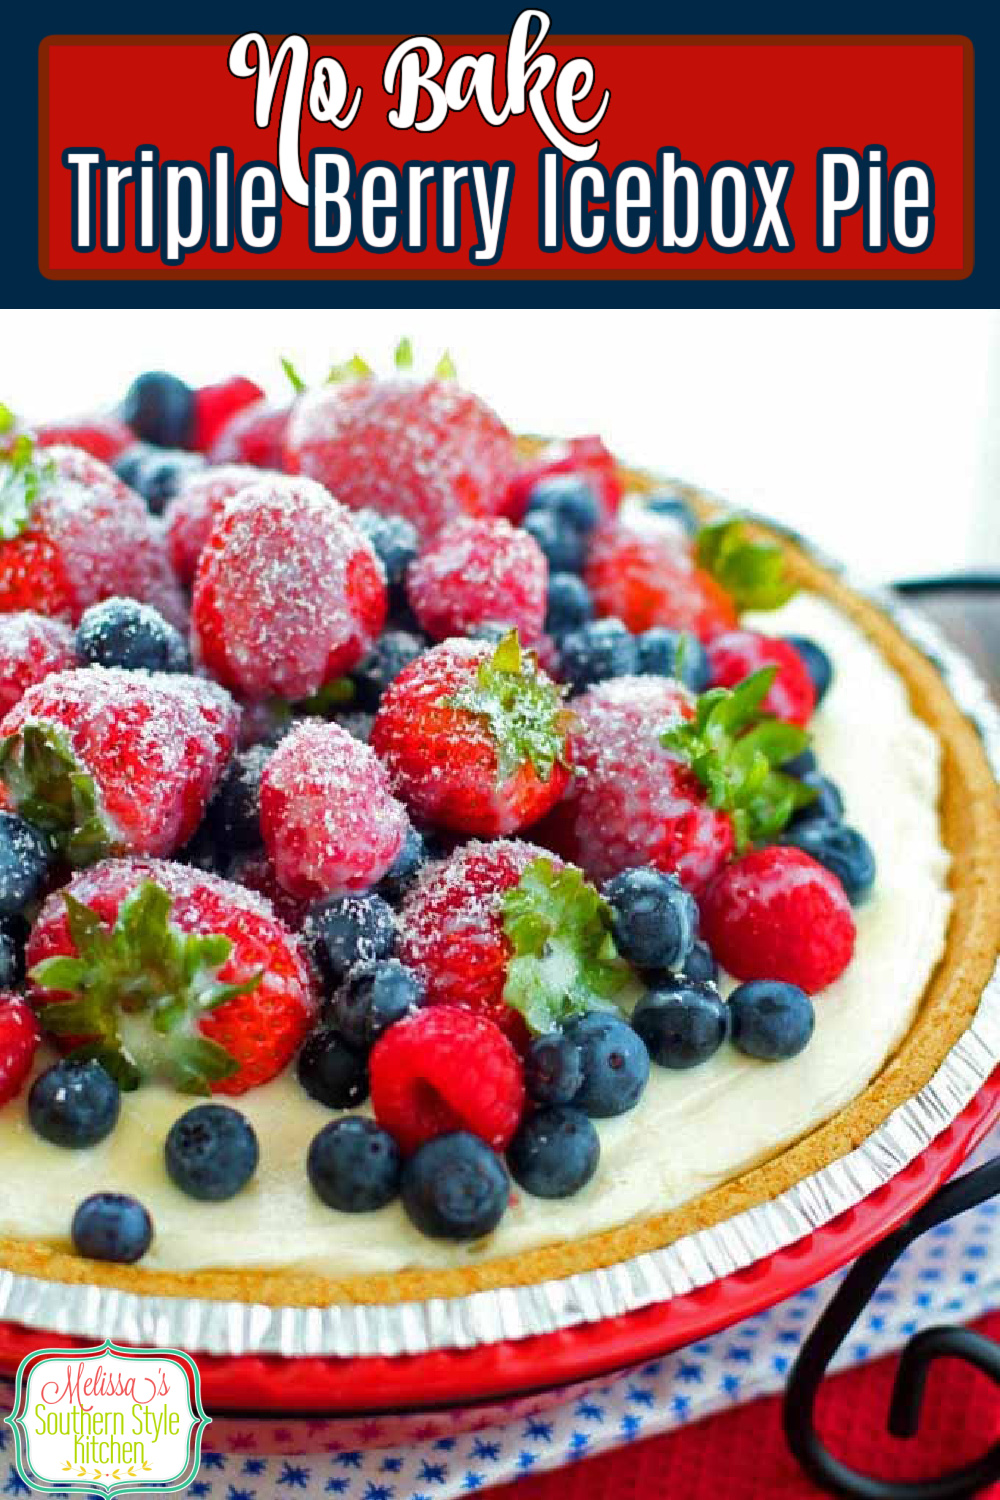 Top this decadent No Bake Triple Berry Icebox Pie with a drizzle of warm white chocolate and grated white chocolate bar for the finish #nobakepie #iceboxpie #tripleberry #tripleberrypie #freshberries #berrypie #blueberries #strawberries #pierecipes #desserts #desssertfoodrecipes #sweets #southernfood #southernrecipes via @melissasssk